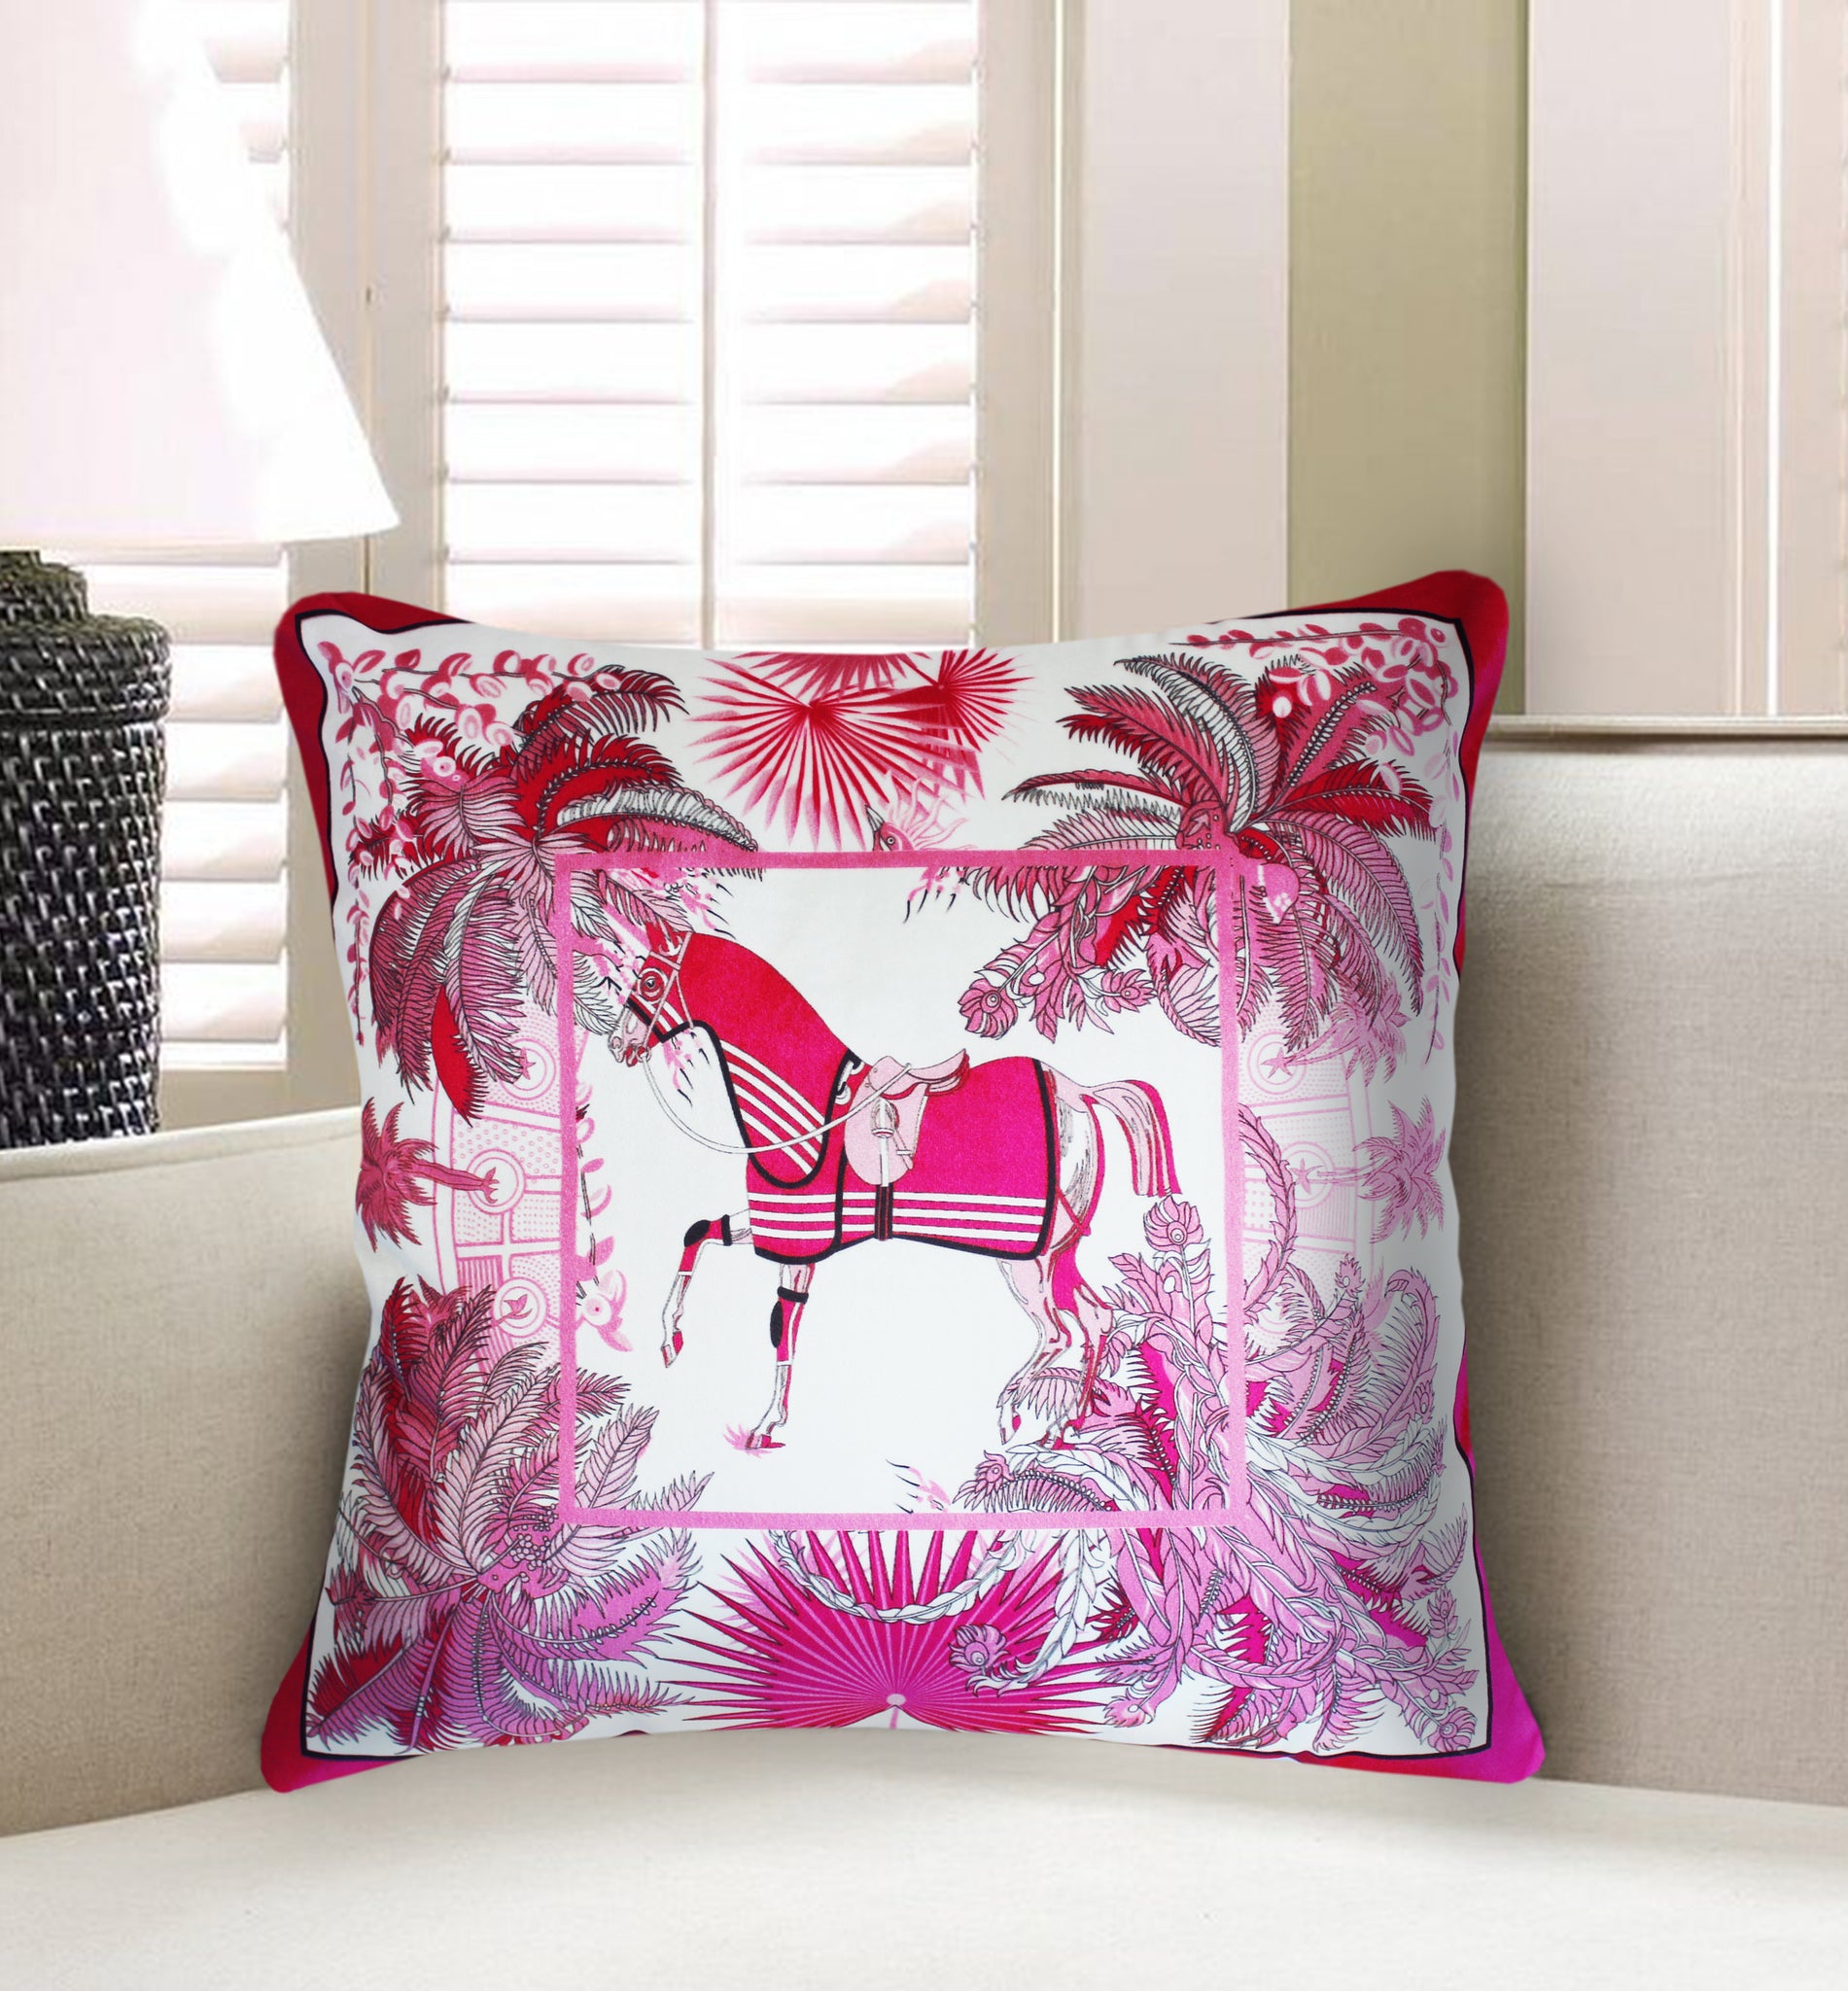 Pink Velvet Cushion Cover, Hermes Inspired Horse Printed Decorative Pillow, Vintage Home Décor Throw Pillow Cover,  45 x 45 CM